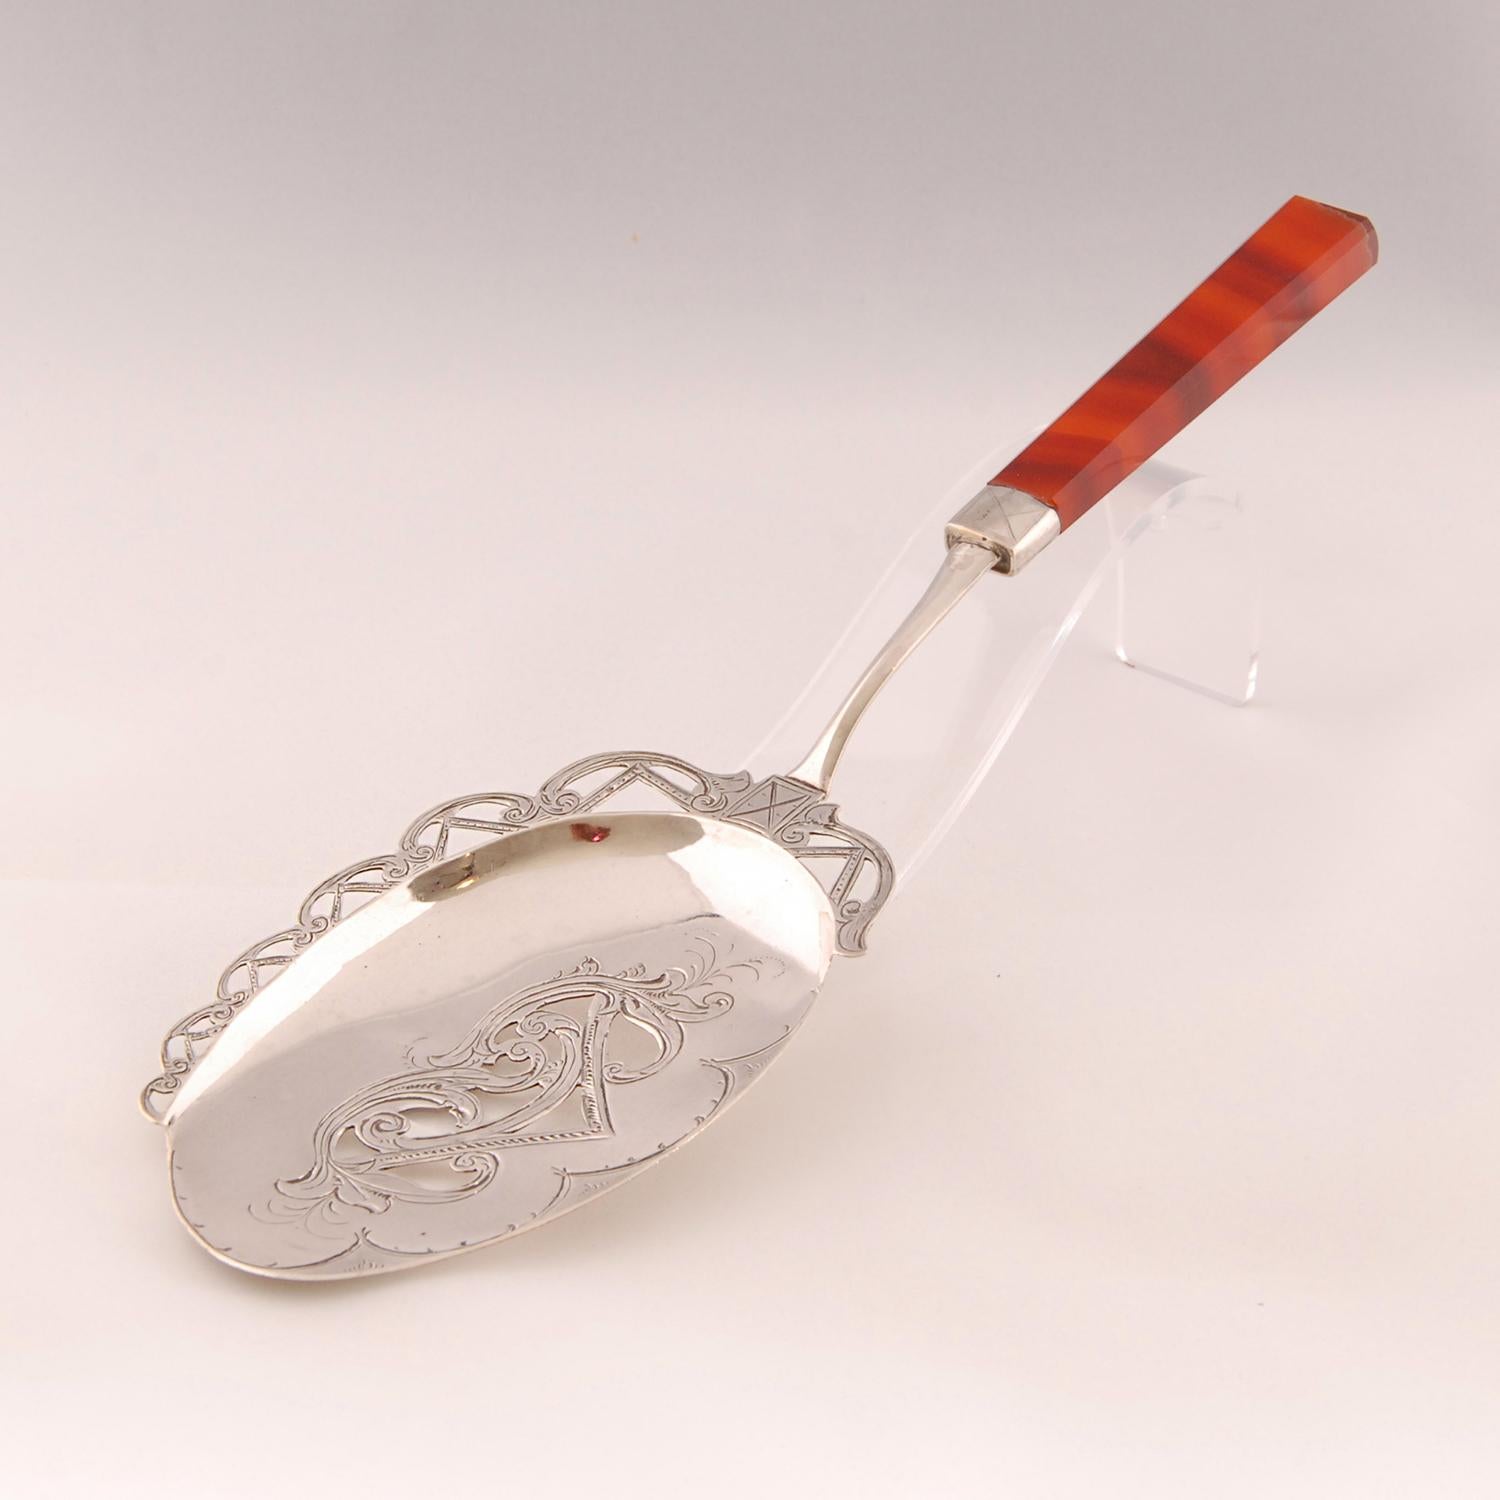 Antique Dutch sterling silver cake server
Made of silver and carneool agate
Engraved with typical Victorian - Biedermeier pattern
Origin The Netherlands
Hallmarked : on the back ( see pictures)
Condition:good
Width 10.2in - 26cm
Depth 1.4in -